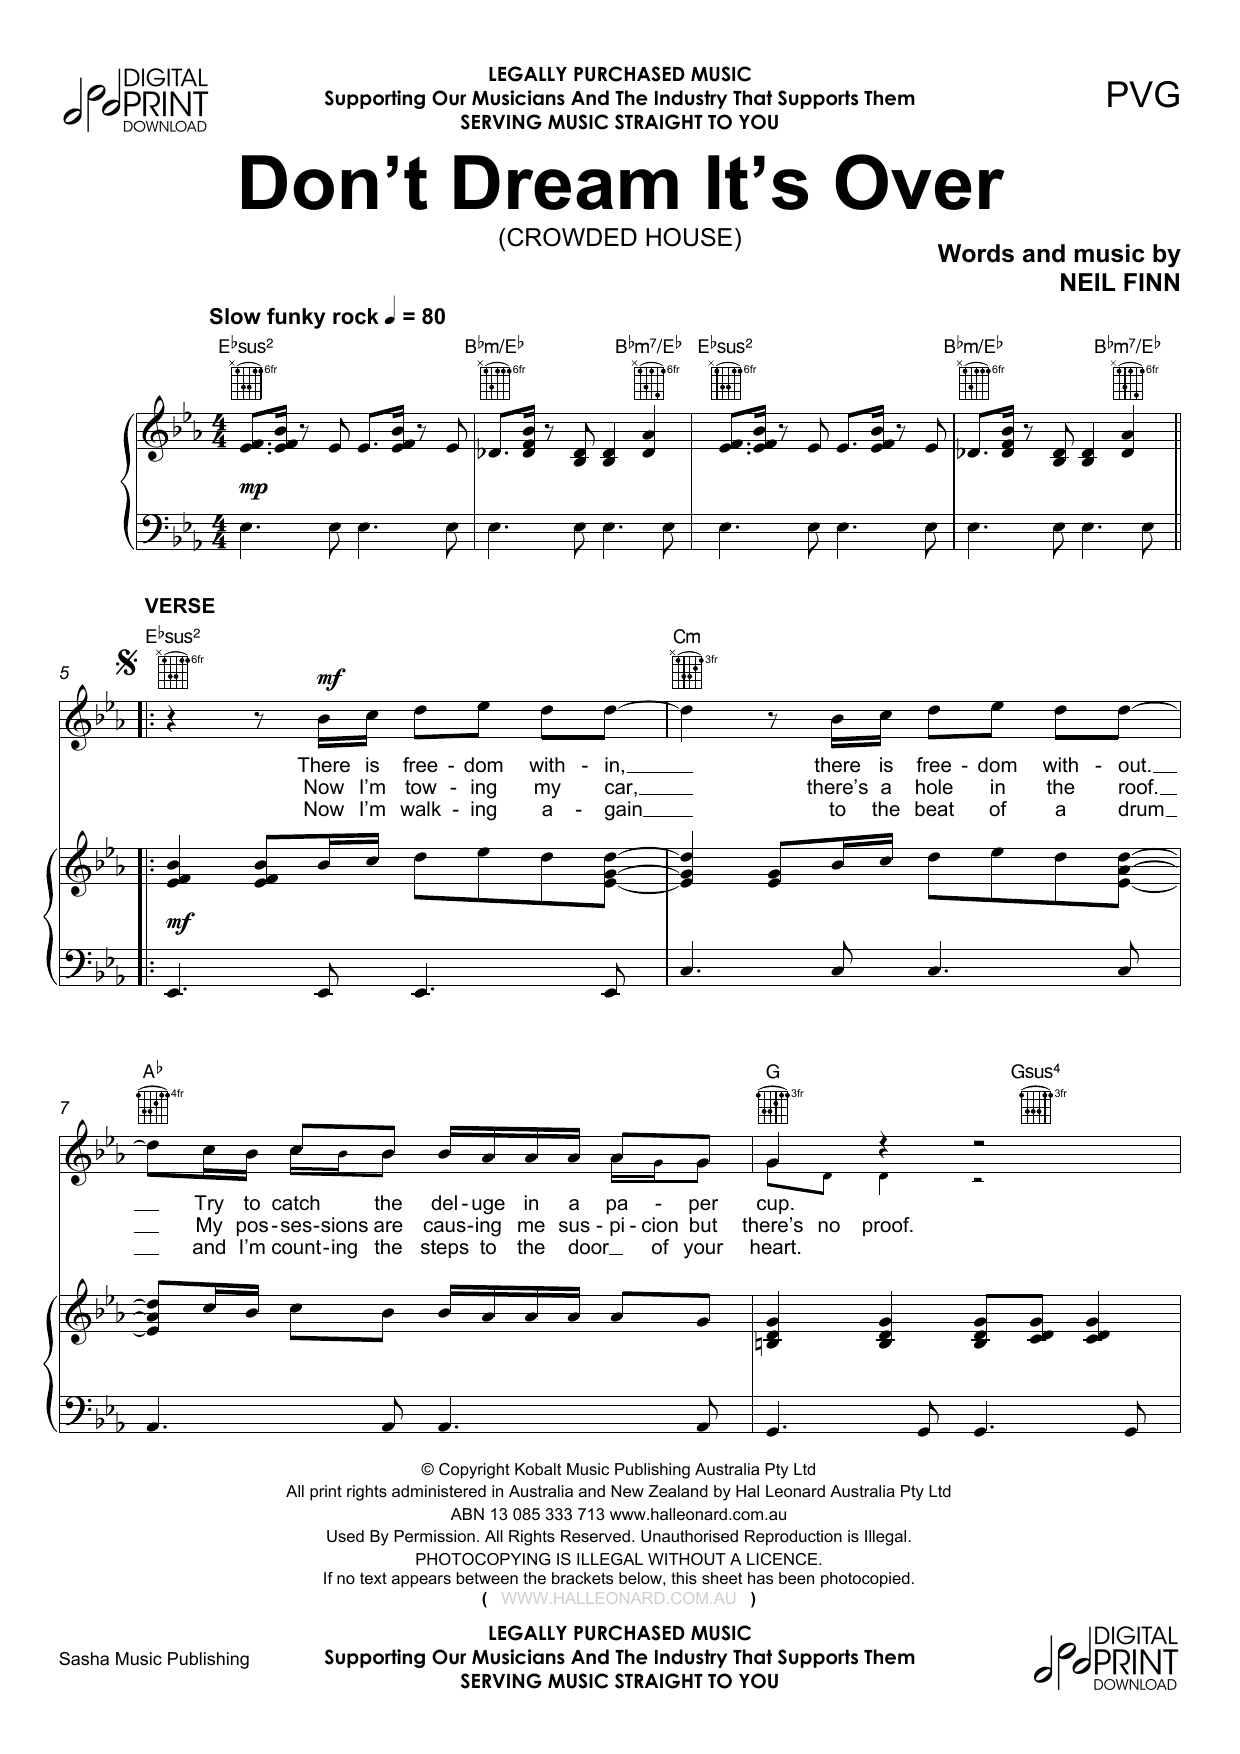 Crowded House "Don't Dream Its Over" Sheet Music PDF Notes, Chords